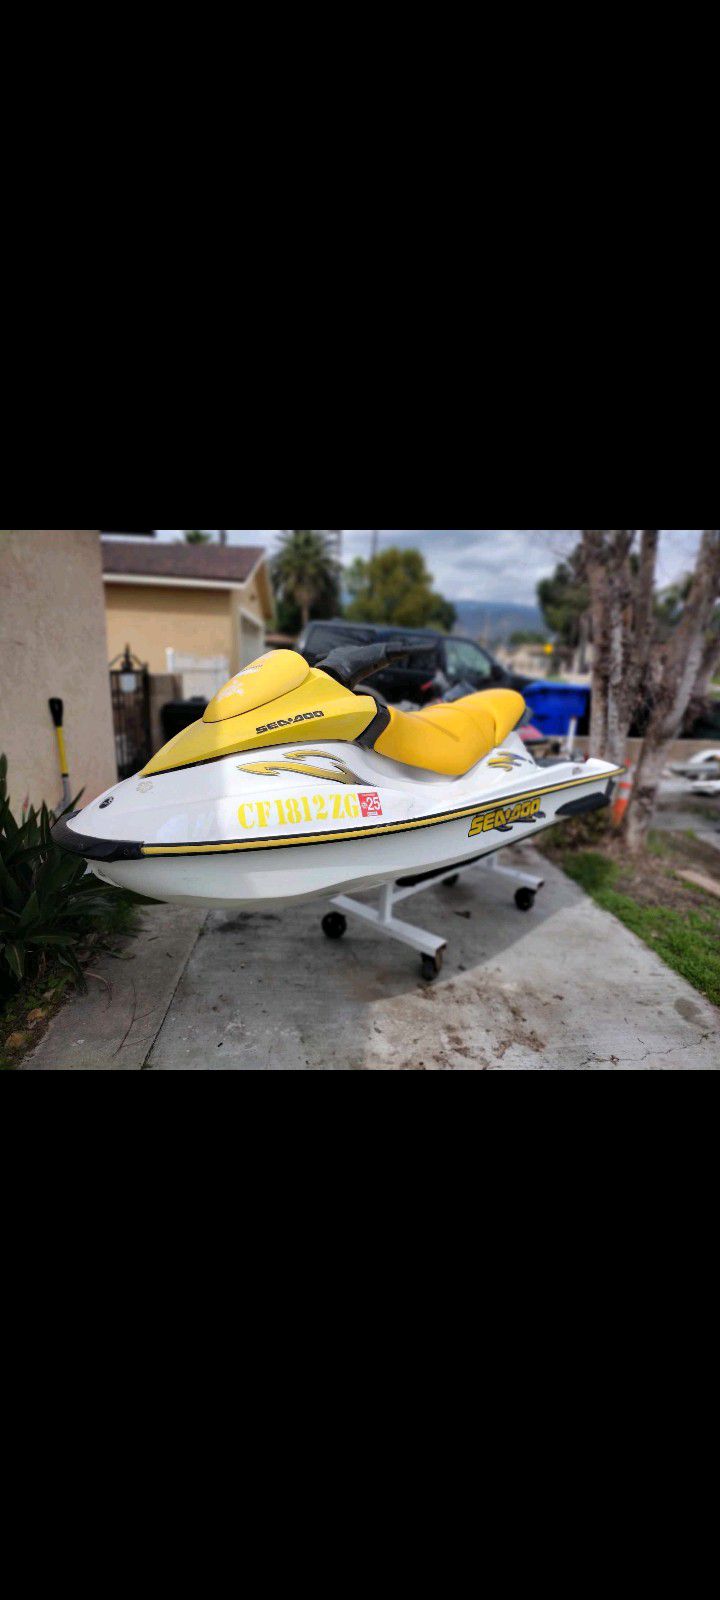 2005 SEADOO GTILE RFI FUEL INJECTION 800CC LAKE READY NEW SEATS  42 FACTORY HOURS CURRENTLY TAGGED WITH TITLE